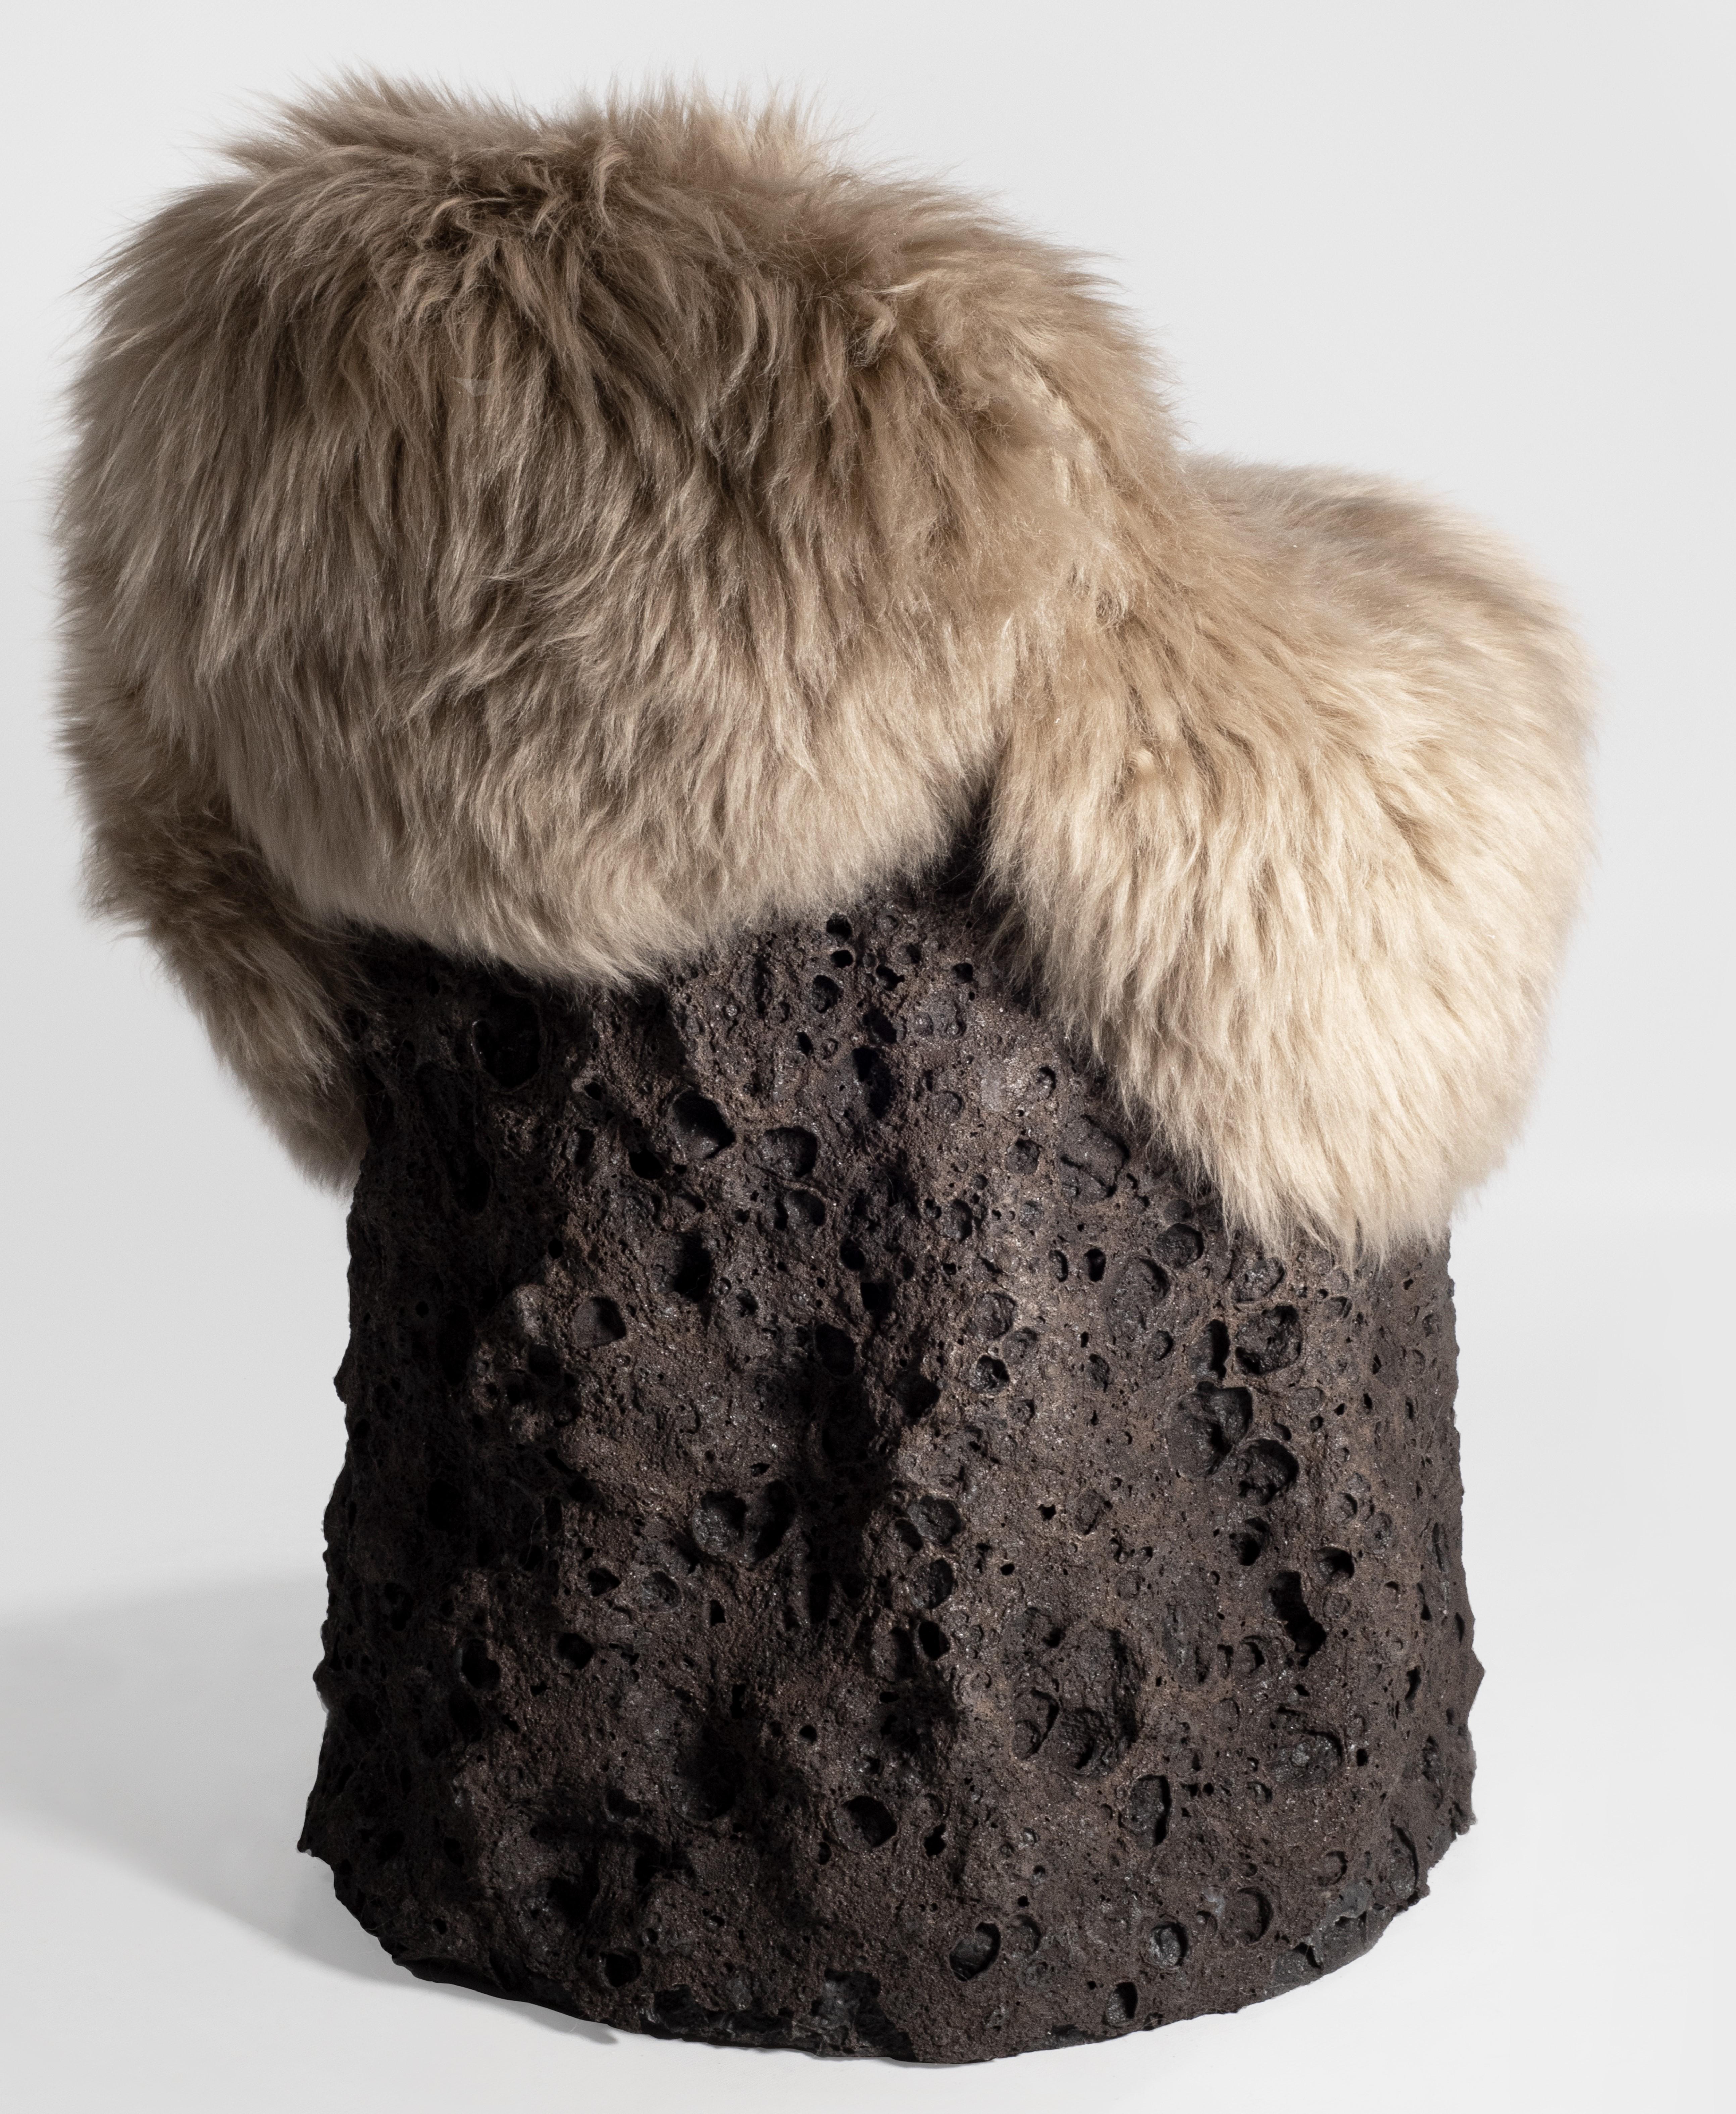 Modern Geoprimitive 021 Ceramic Settle with Sheep Wool by Niclas Wolf For Sale